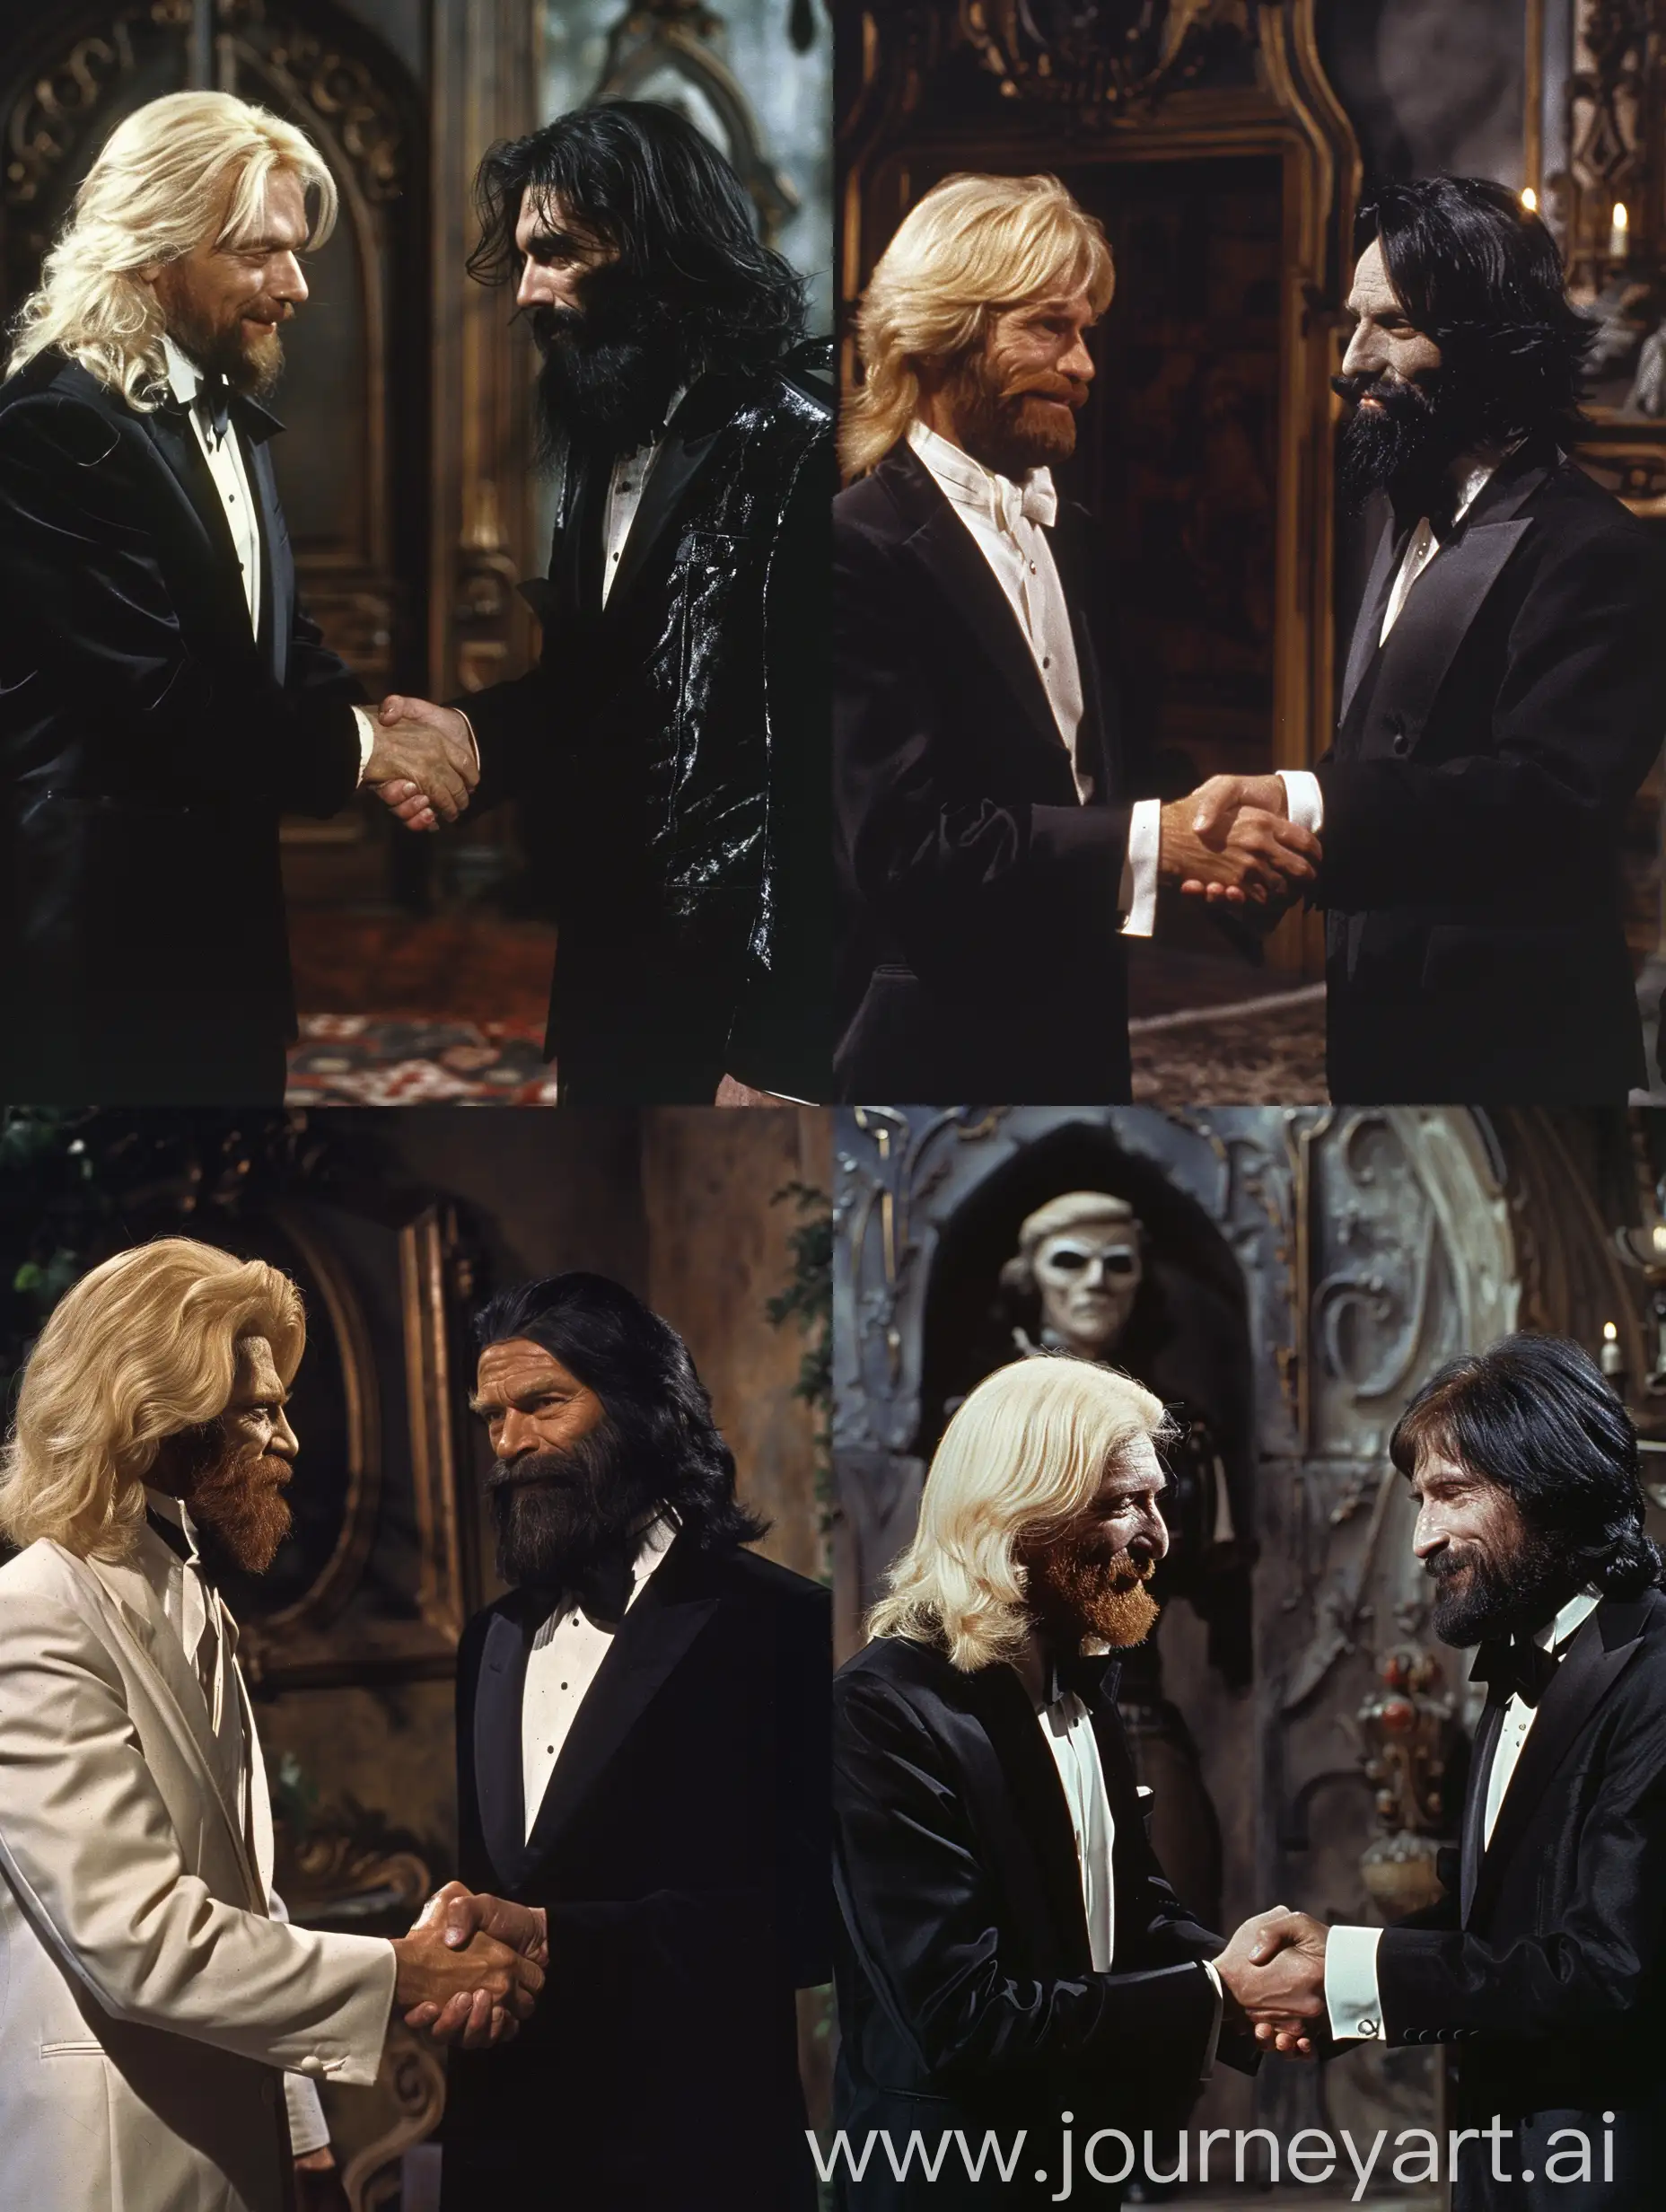 Realistic,70 horror fantasy movie,dvd screengrab
Blond man with tuexido shaking hands with black haired bearded man in tuexido